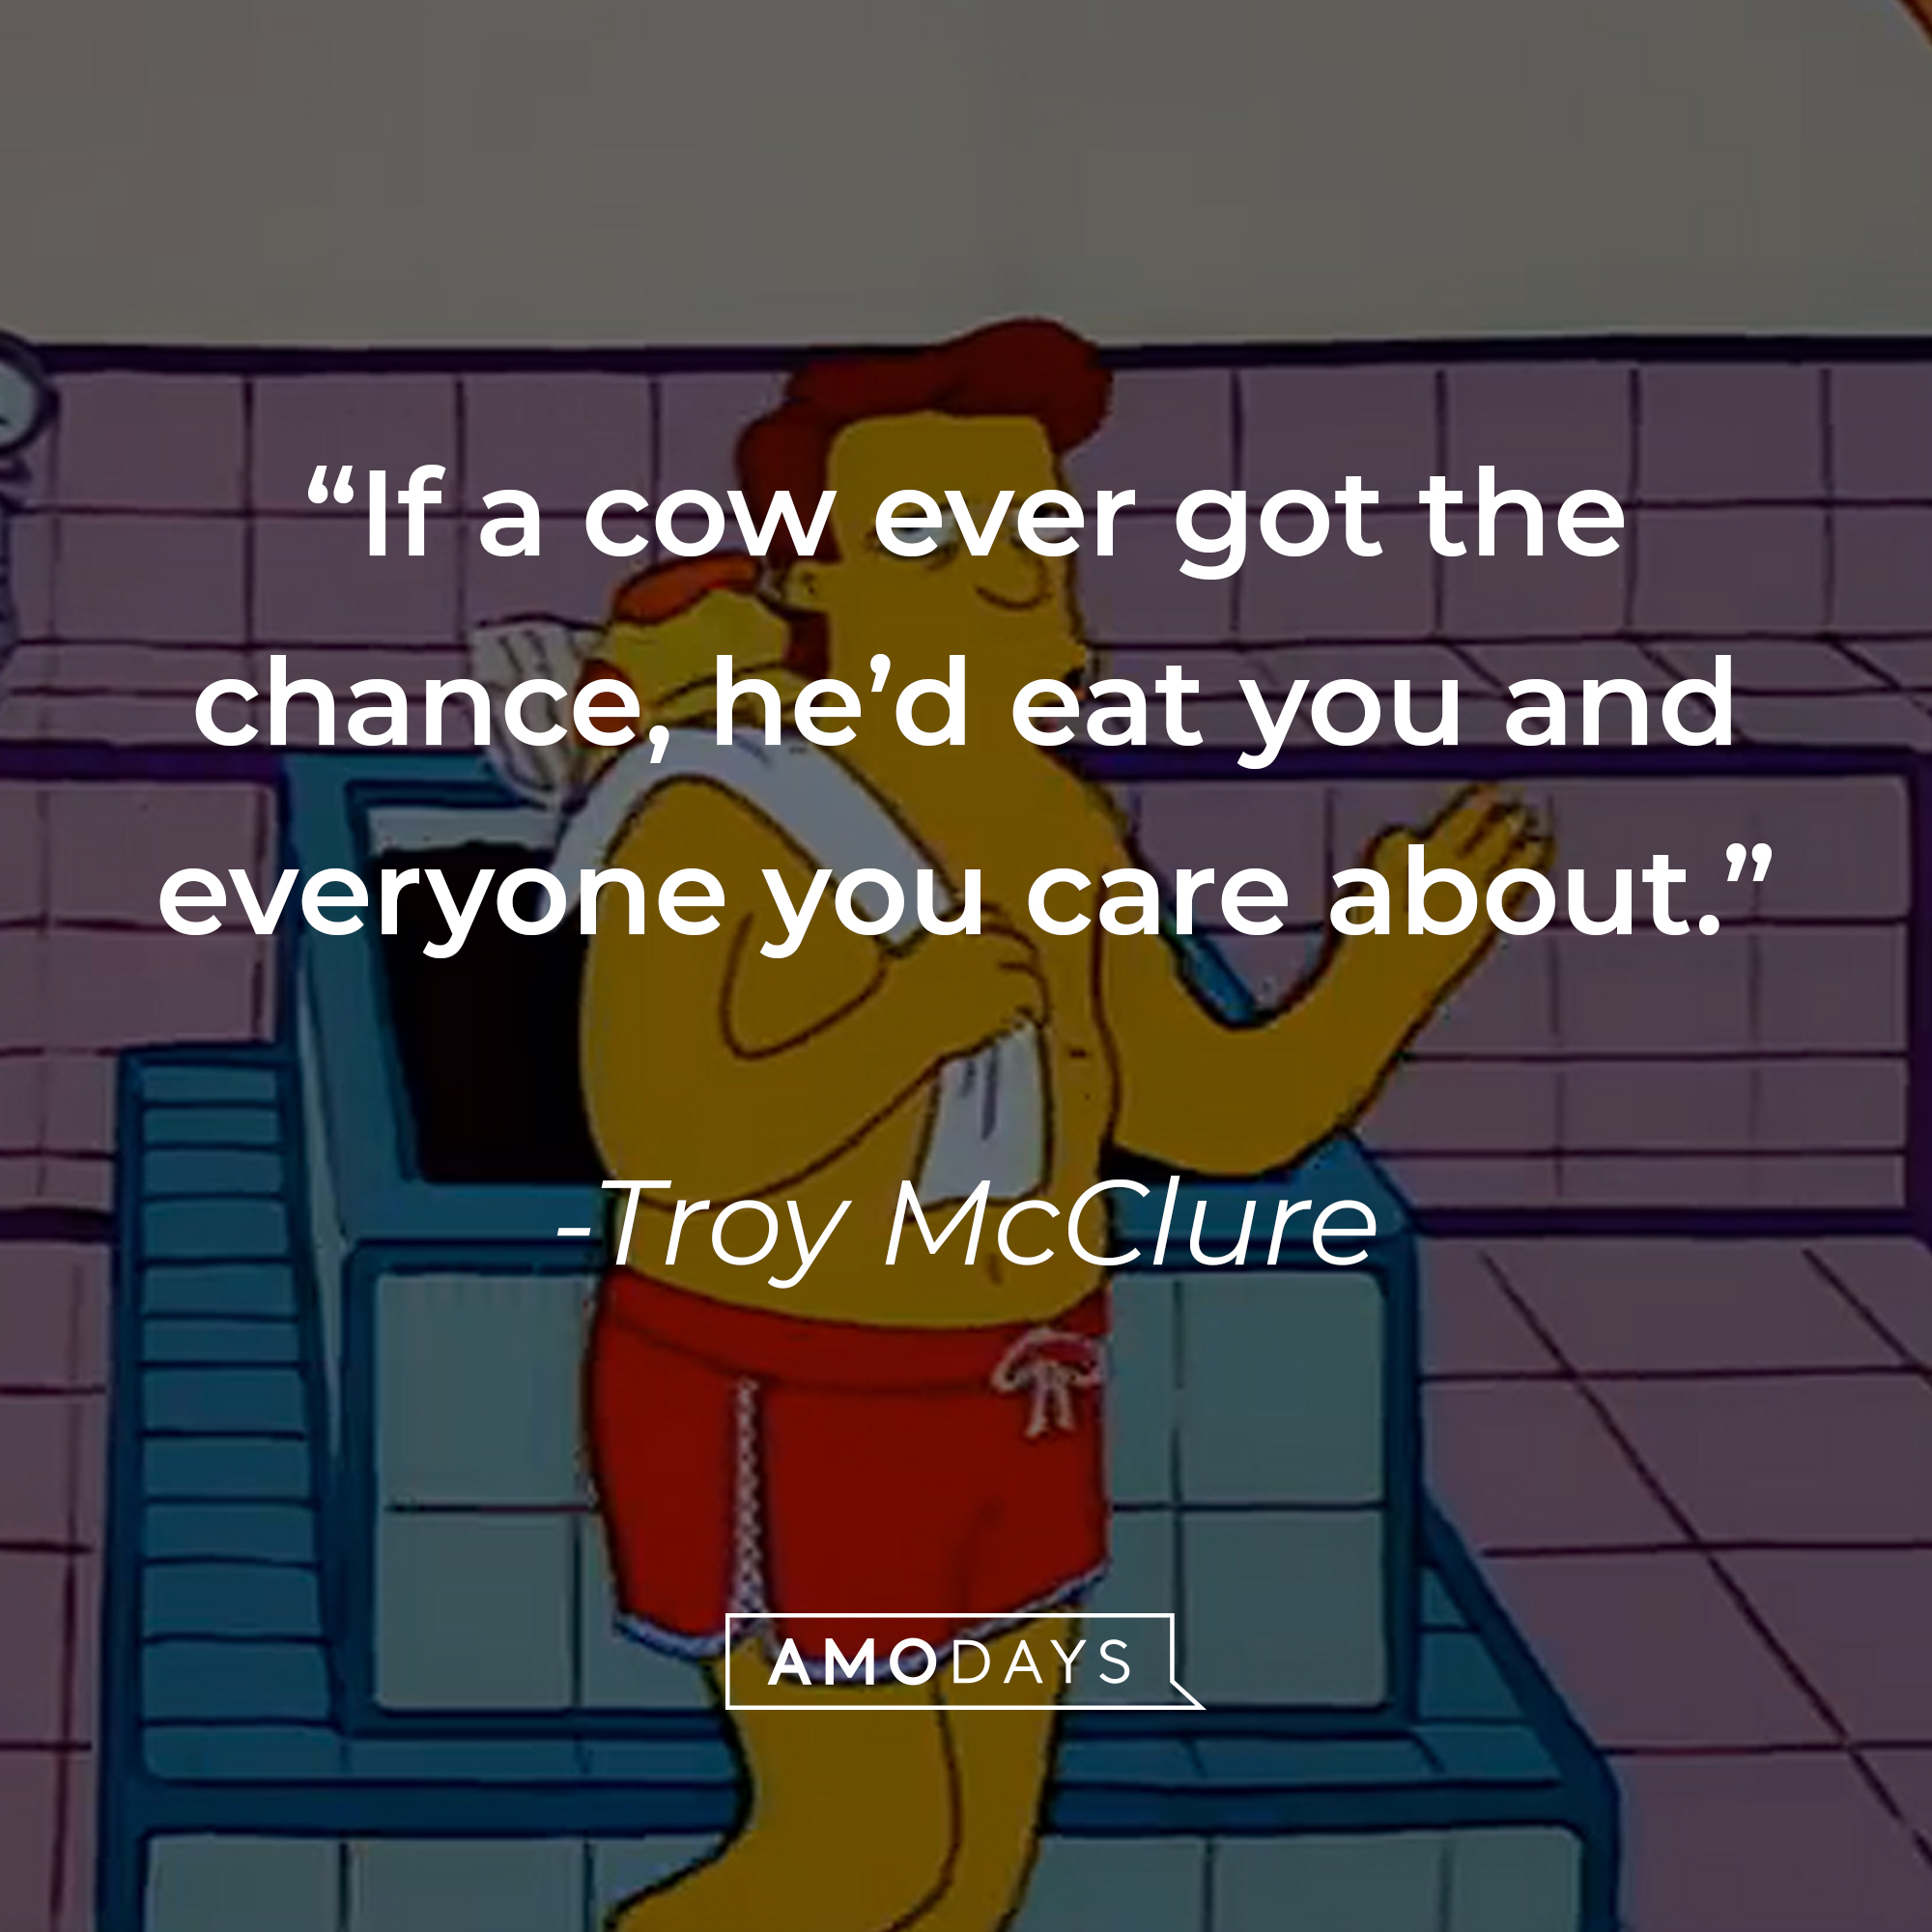 Troy McClure, with his quote: “If a cow ever got the chance, he’d eat you and everyone you care about.” | Source: facebook.com/TheSimpsons